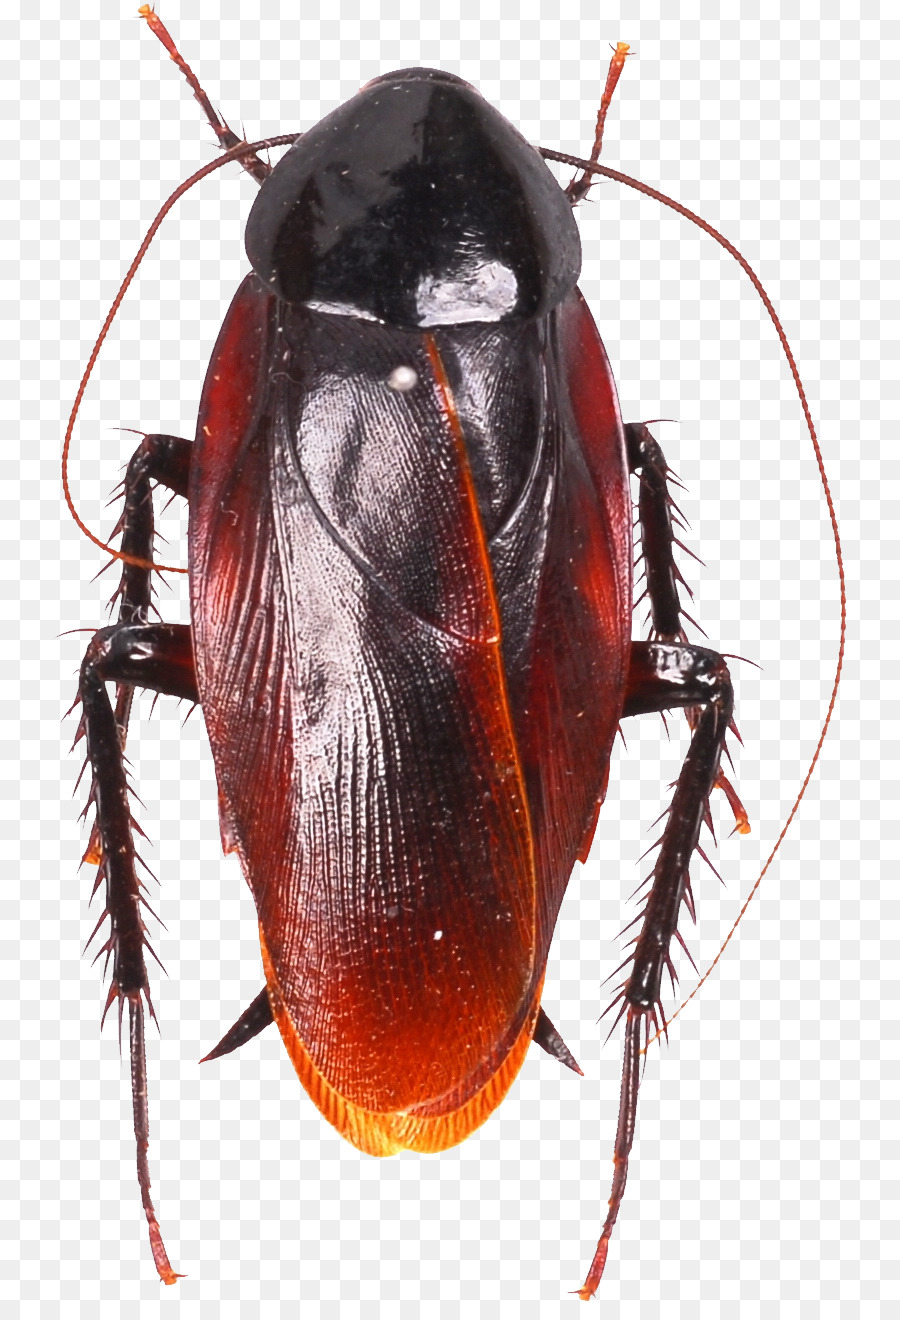 American cockroach Pest Control Roach bait Smokybrown cockroach - cockroach png download - 795*1302 - Free Transparent Cockroach png Download.